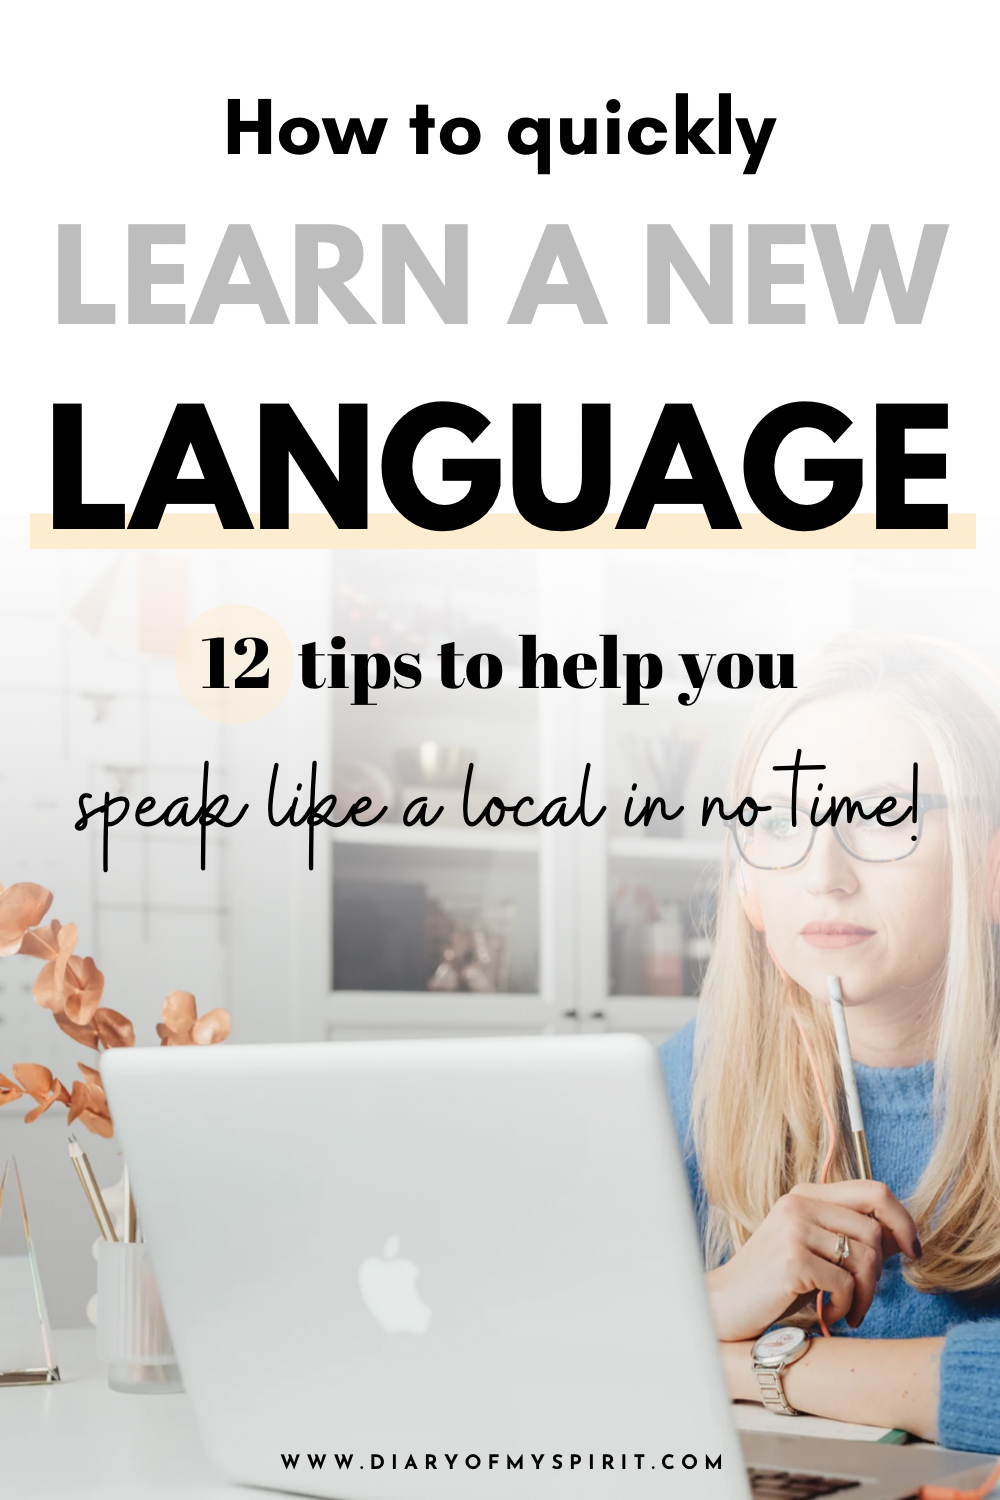 how to learn a new language fast. language learning tips and tricks. language skills. learn a language quickly.